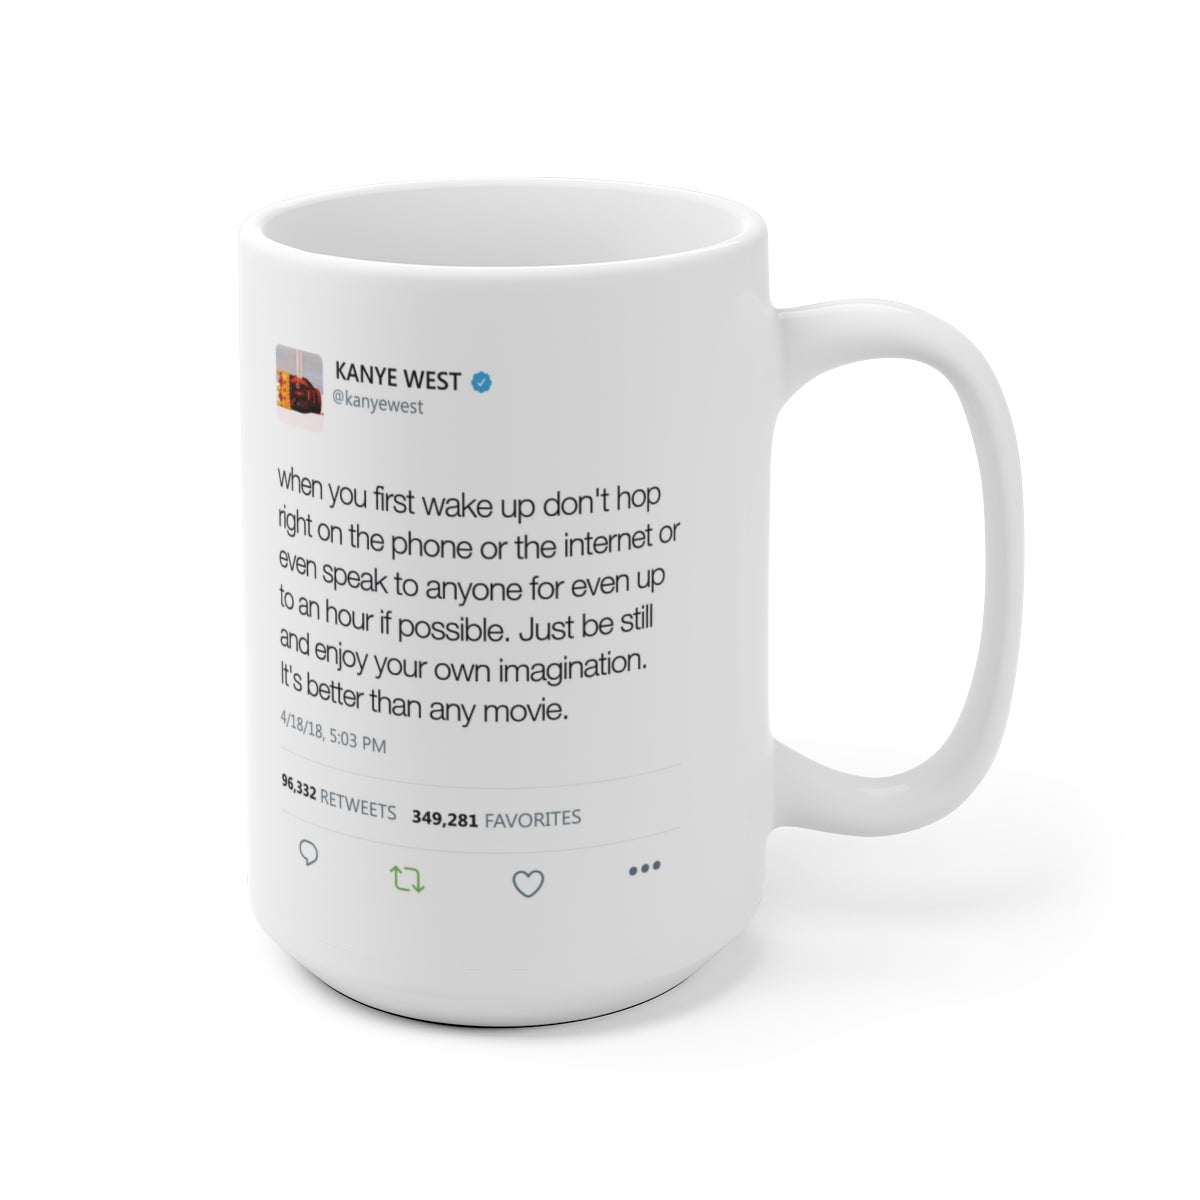 When you first wake up don't hop right on the phone - Kanye West Tweet Mug-Archethype